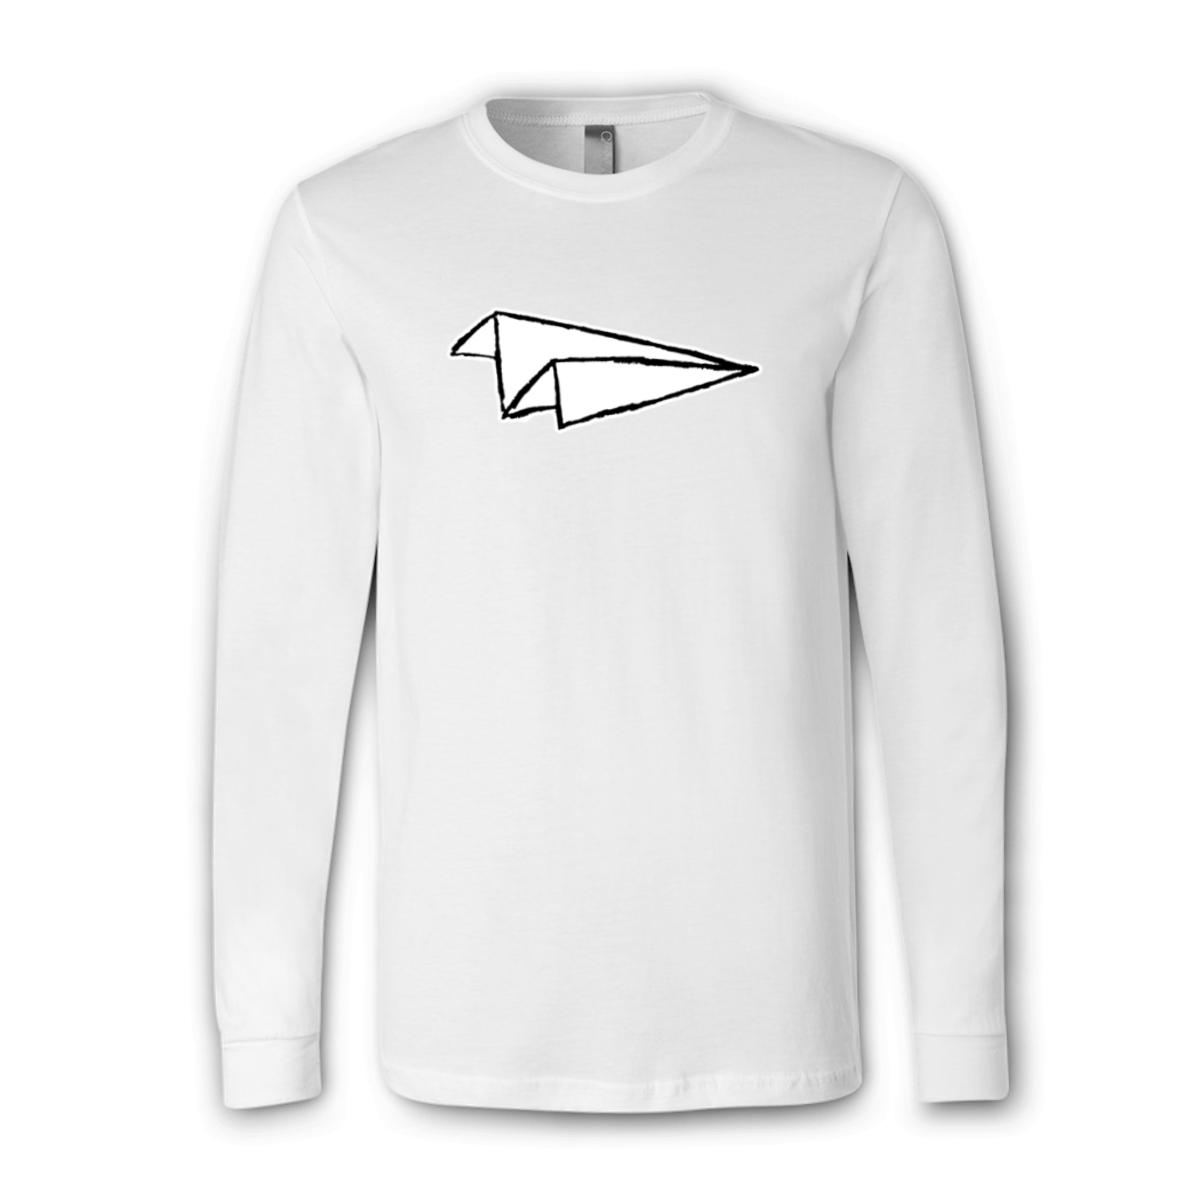 Airplane Sketch Unisex Long Sleeve Tee Double Extra Large white